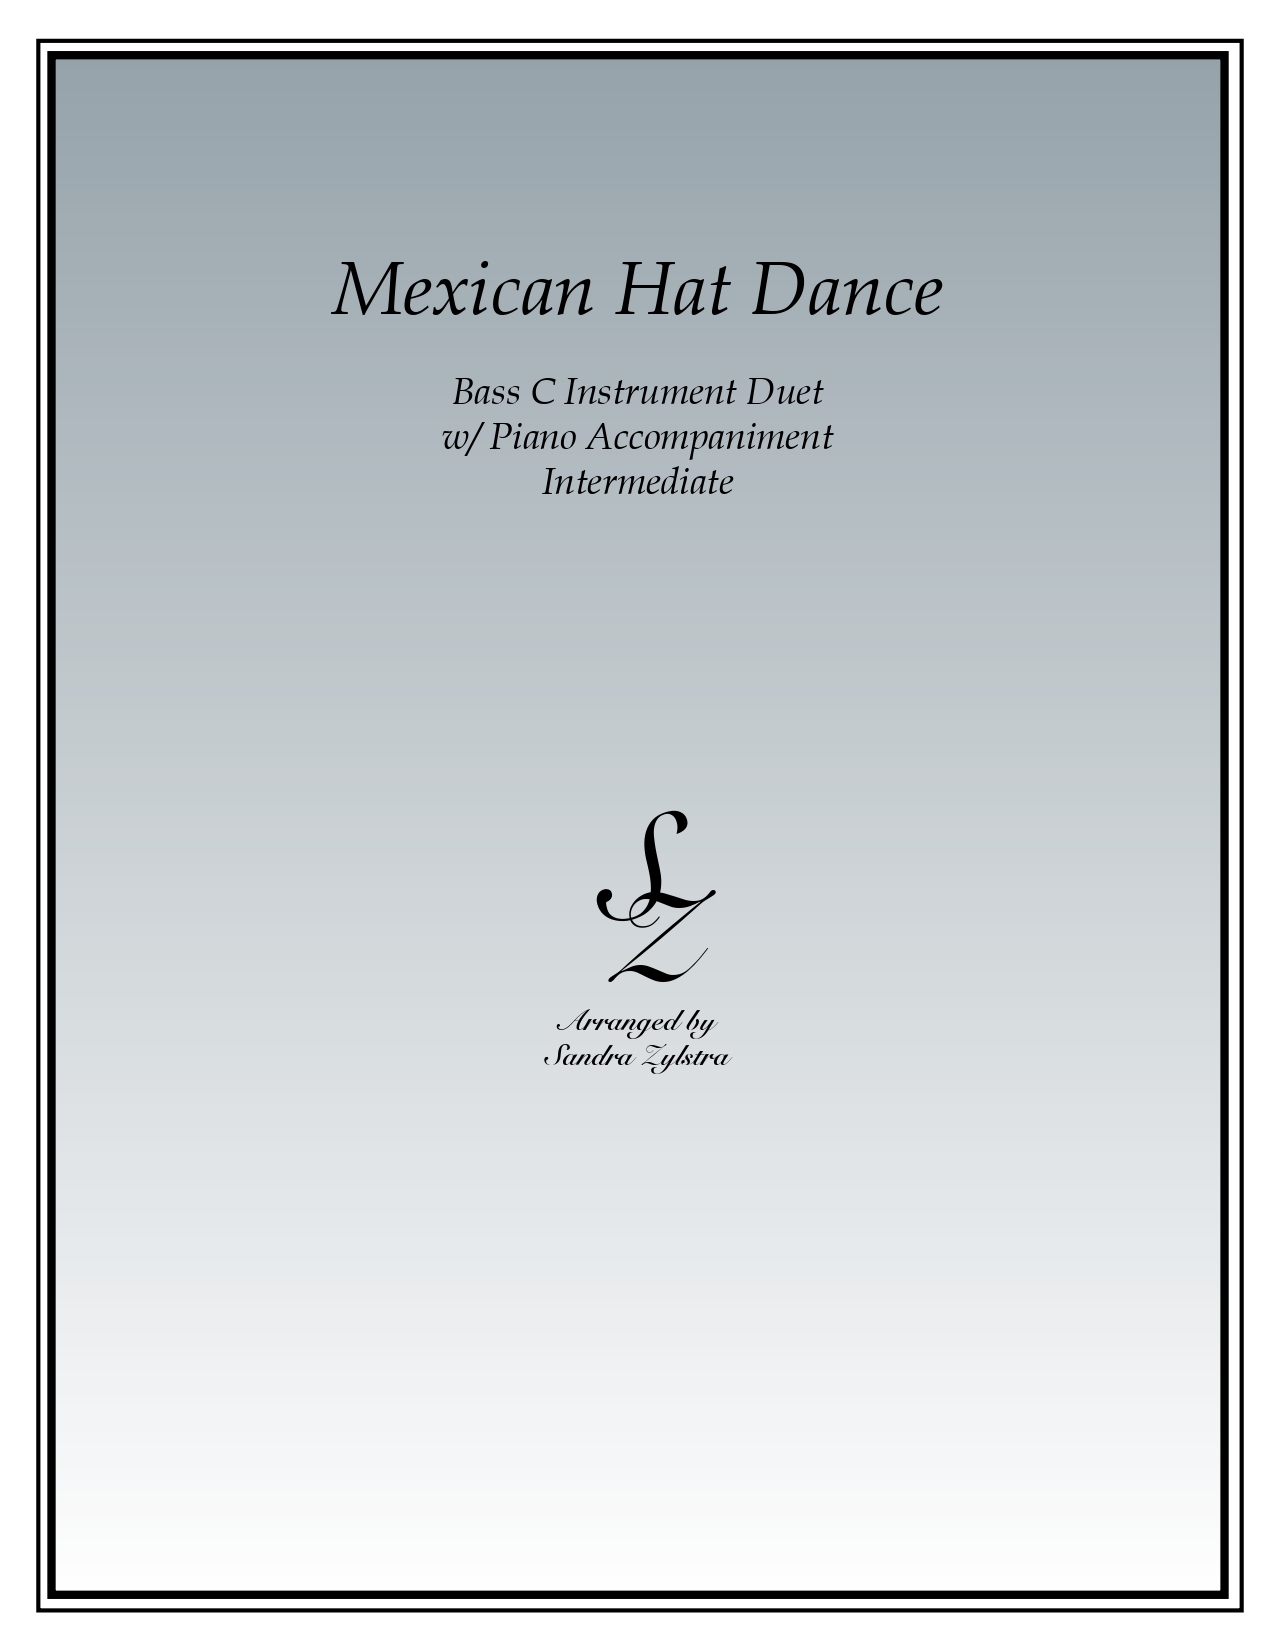 Mexican Hat Dance bass C instrument duet parts cover page 00011